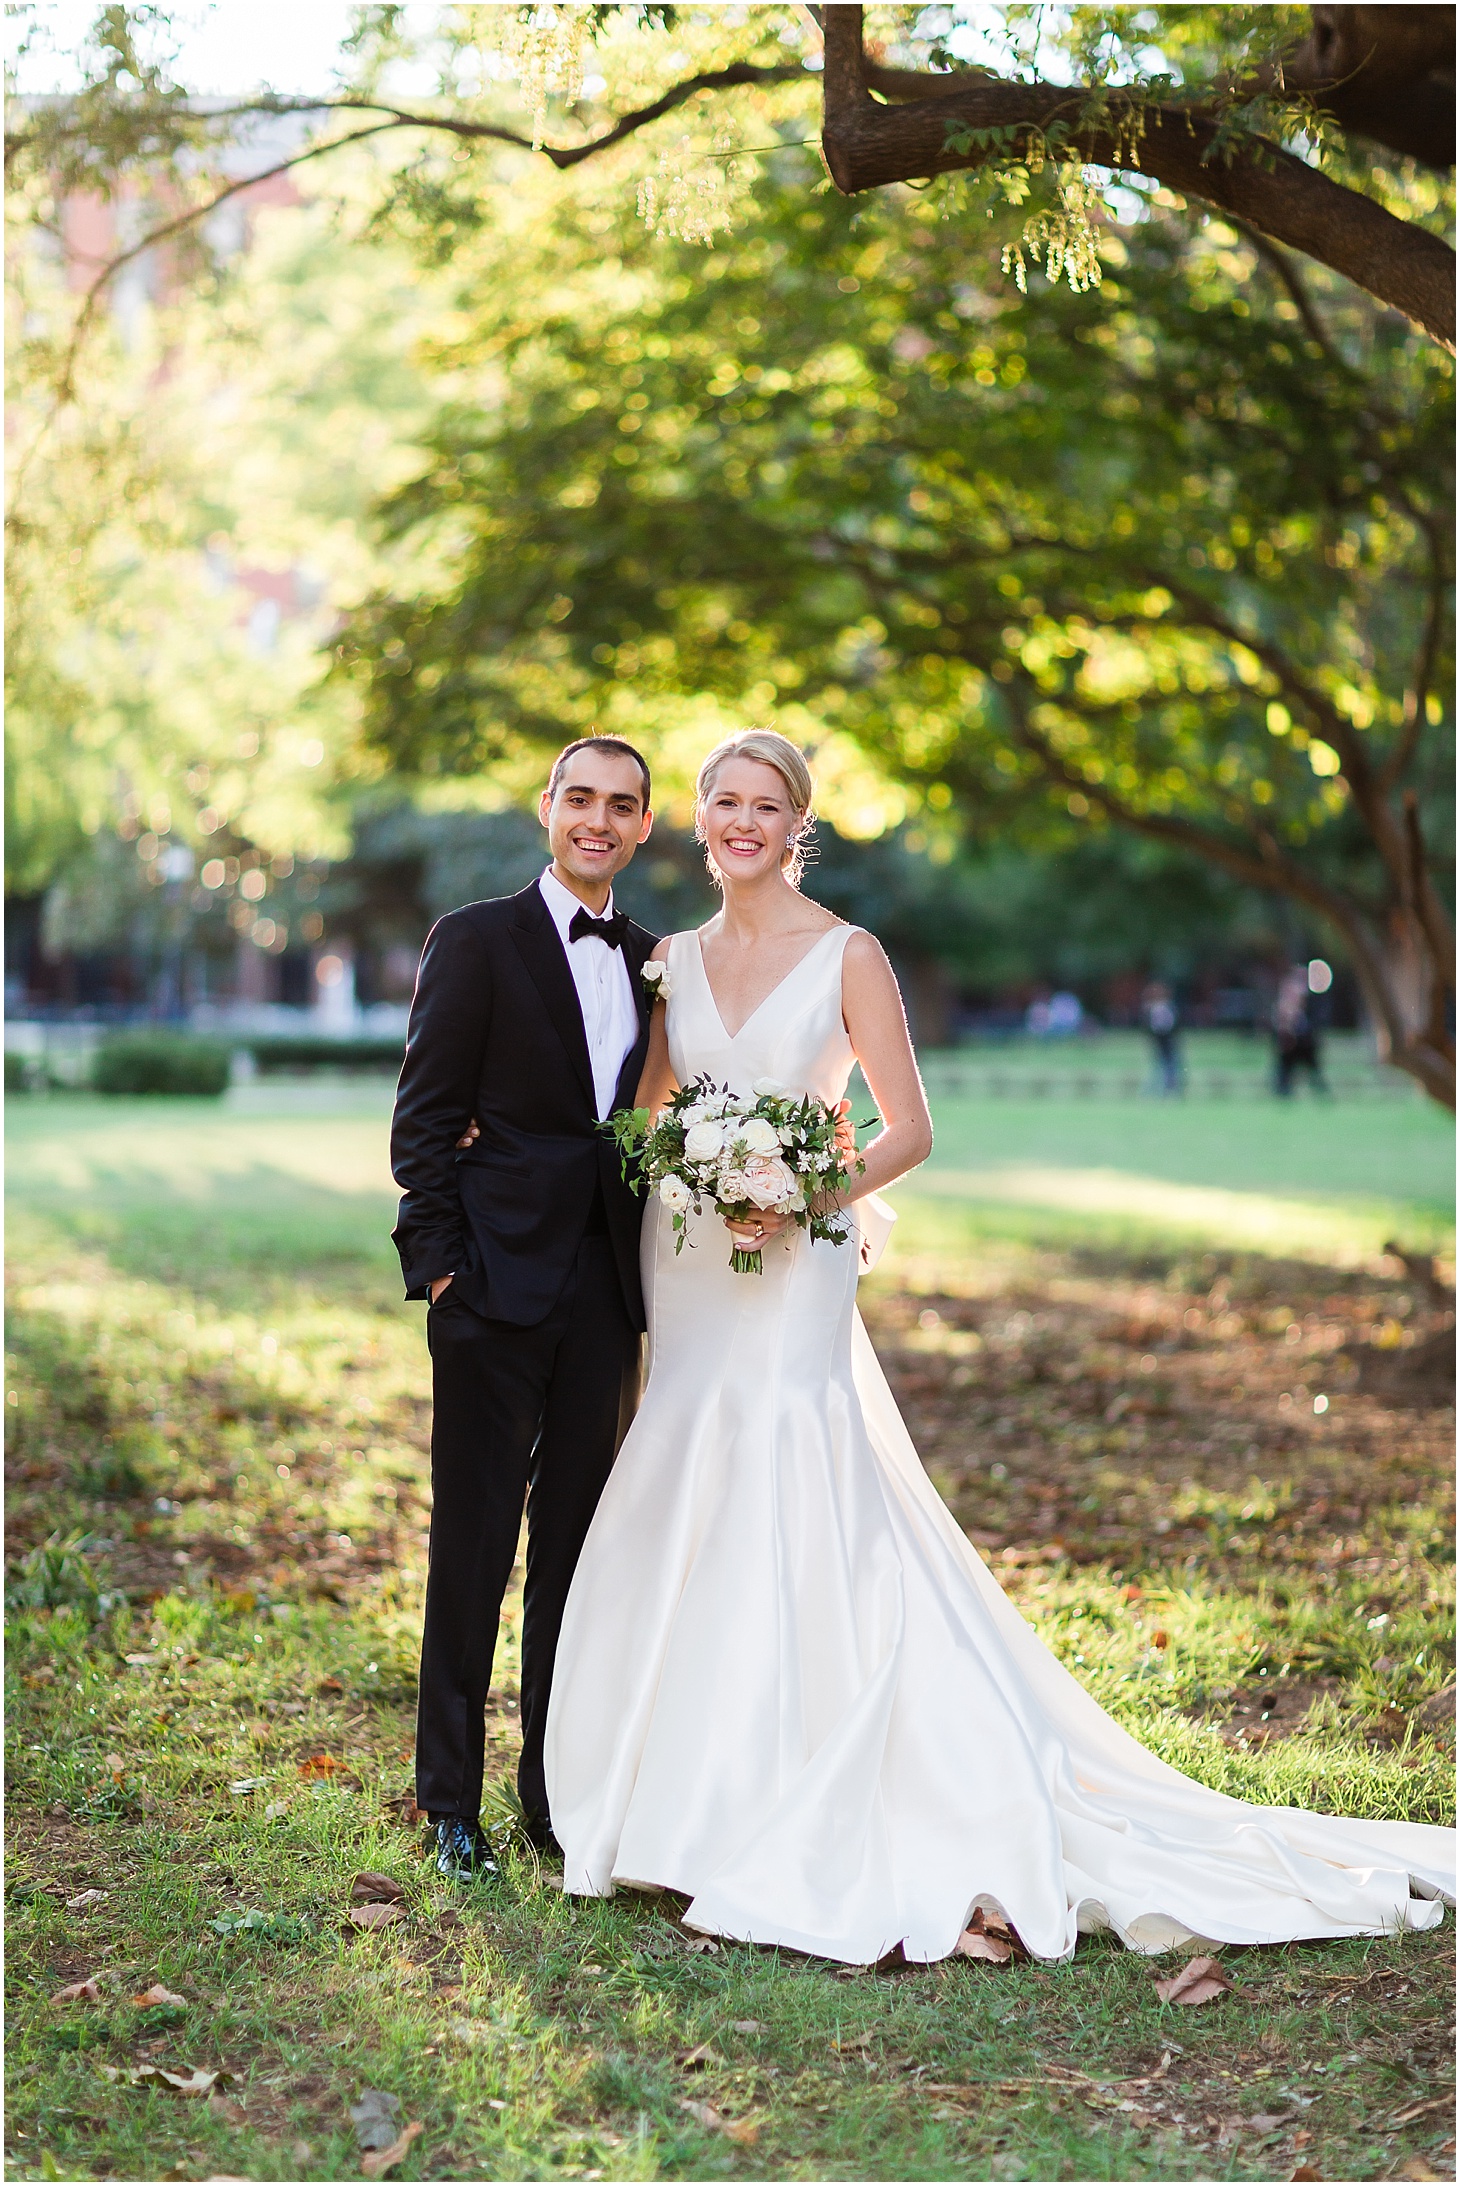 Wedding Portraits in Lafayette Park, Champagne-toned Multicultural Wedding at the Hay-Adams Hotel, Ceremony at National City Christian Church, Sarah Bradshaw Photography, DC Wedding Photographer